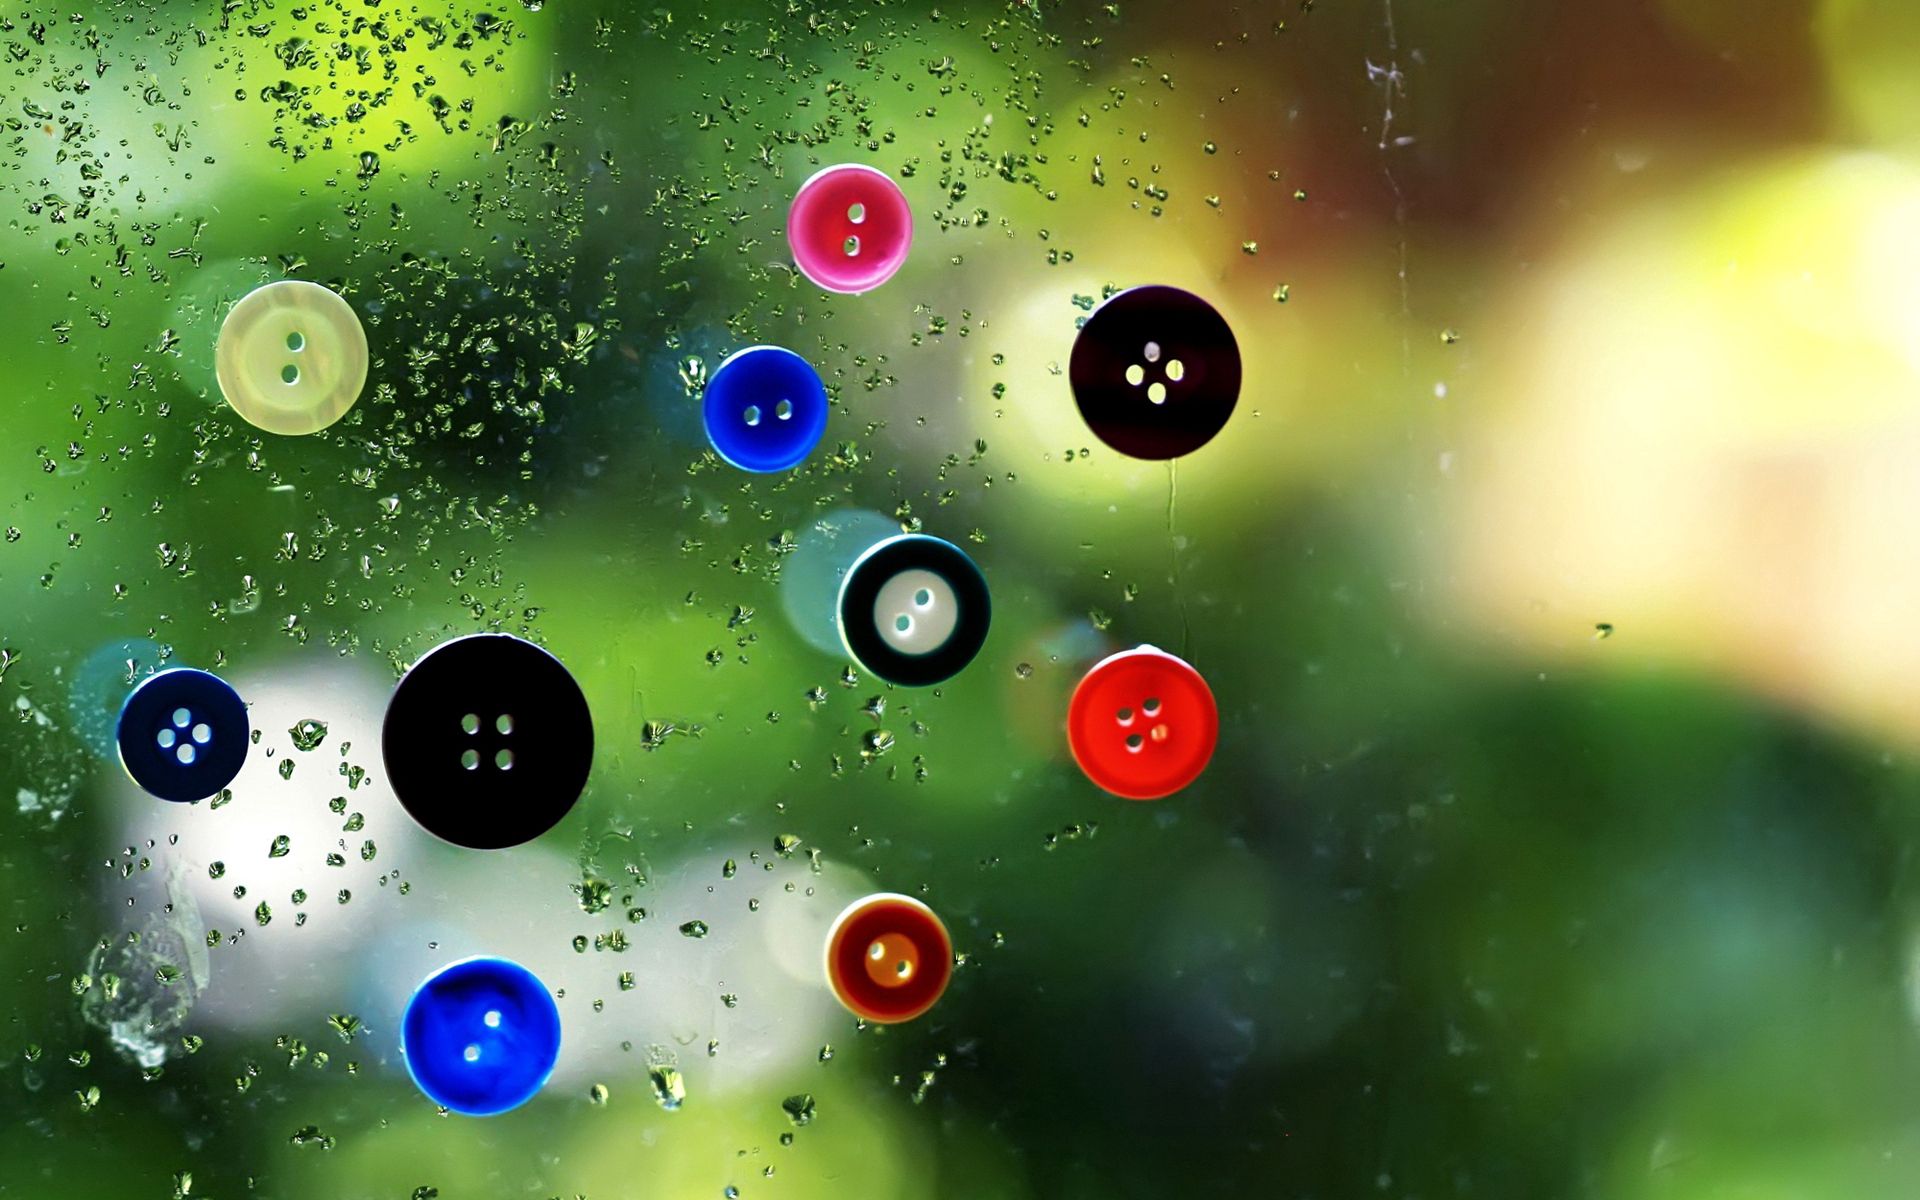 miscellanea, miscellaneous, multicolored, motley, wet, surface, buttons, humid